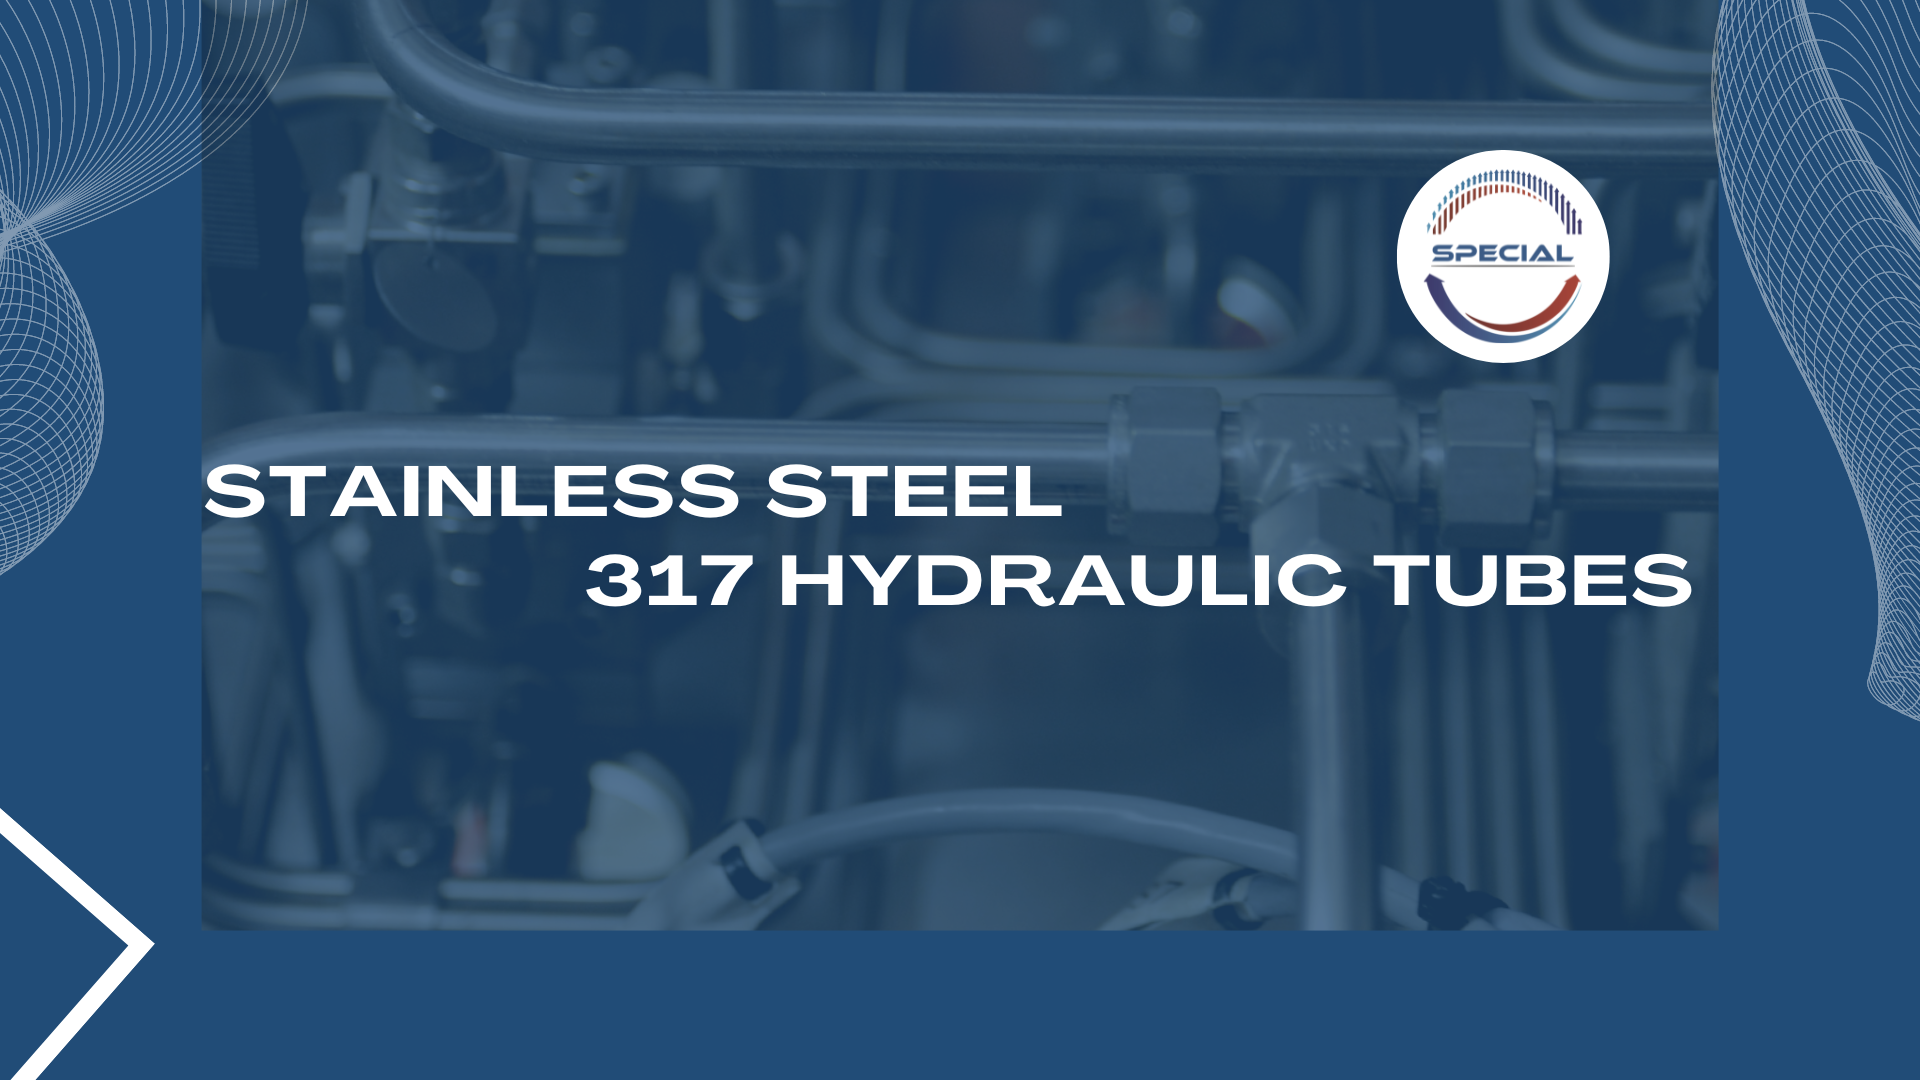 Stainless Steel 317 Hydraulic Tubes